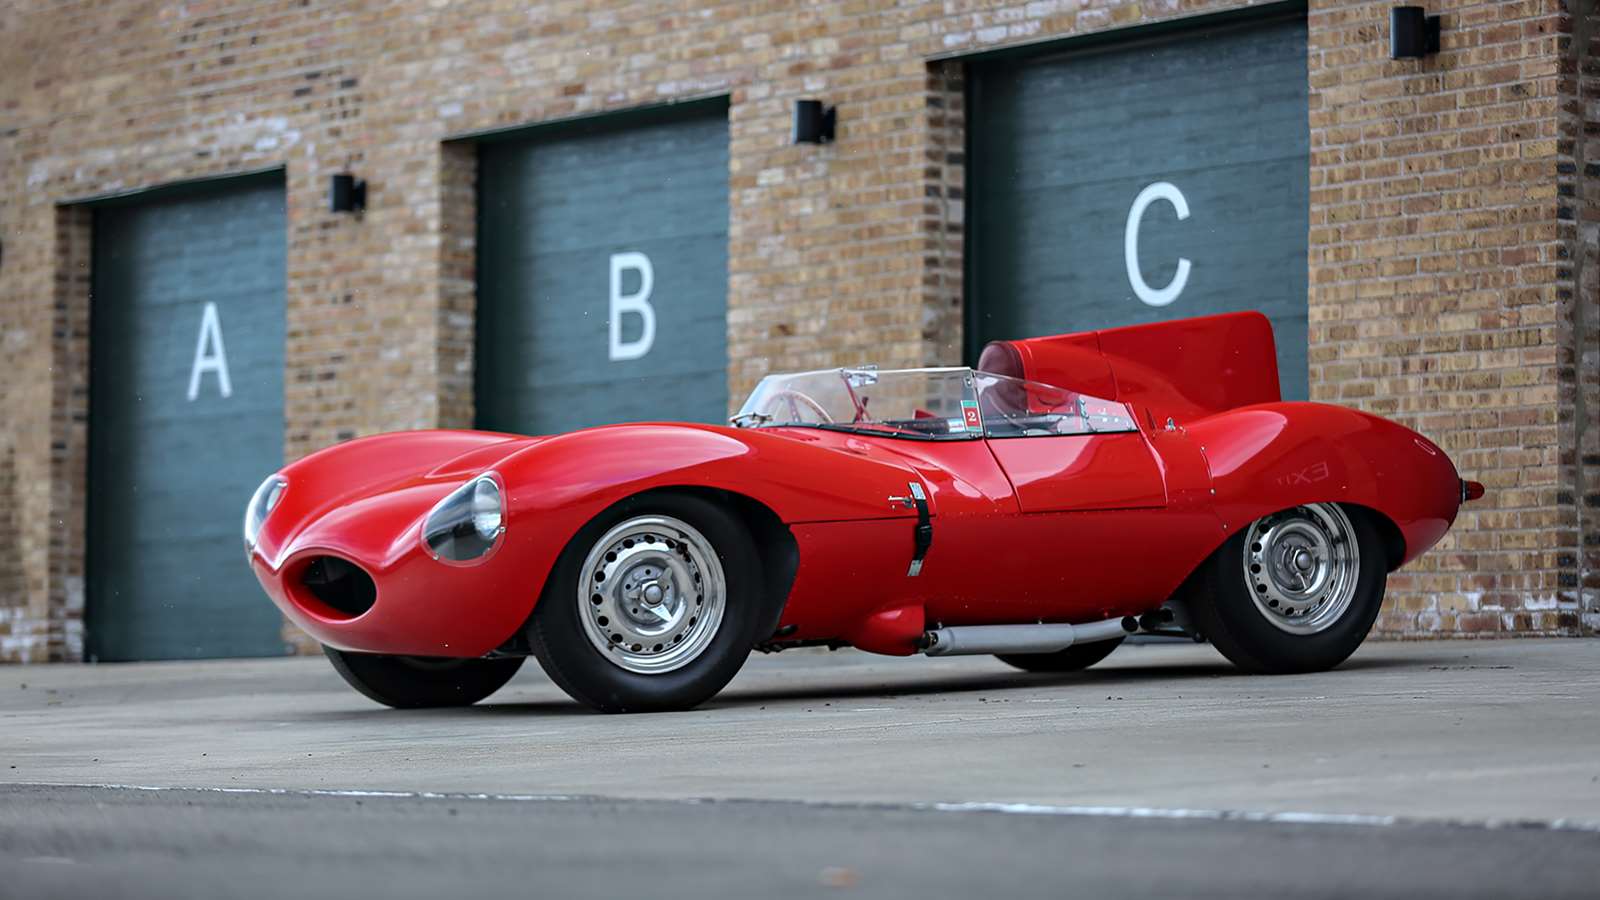 You could own Bernie Ecclestone's old red D-Type